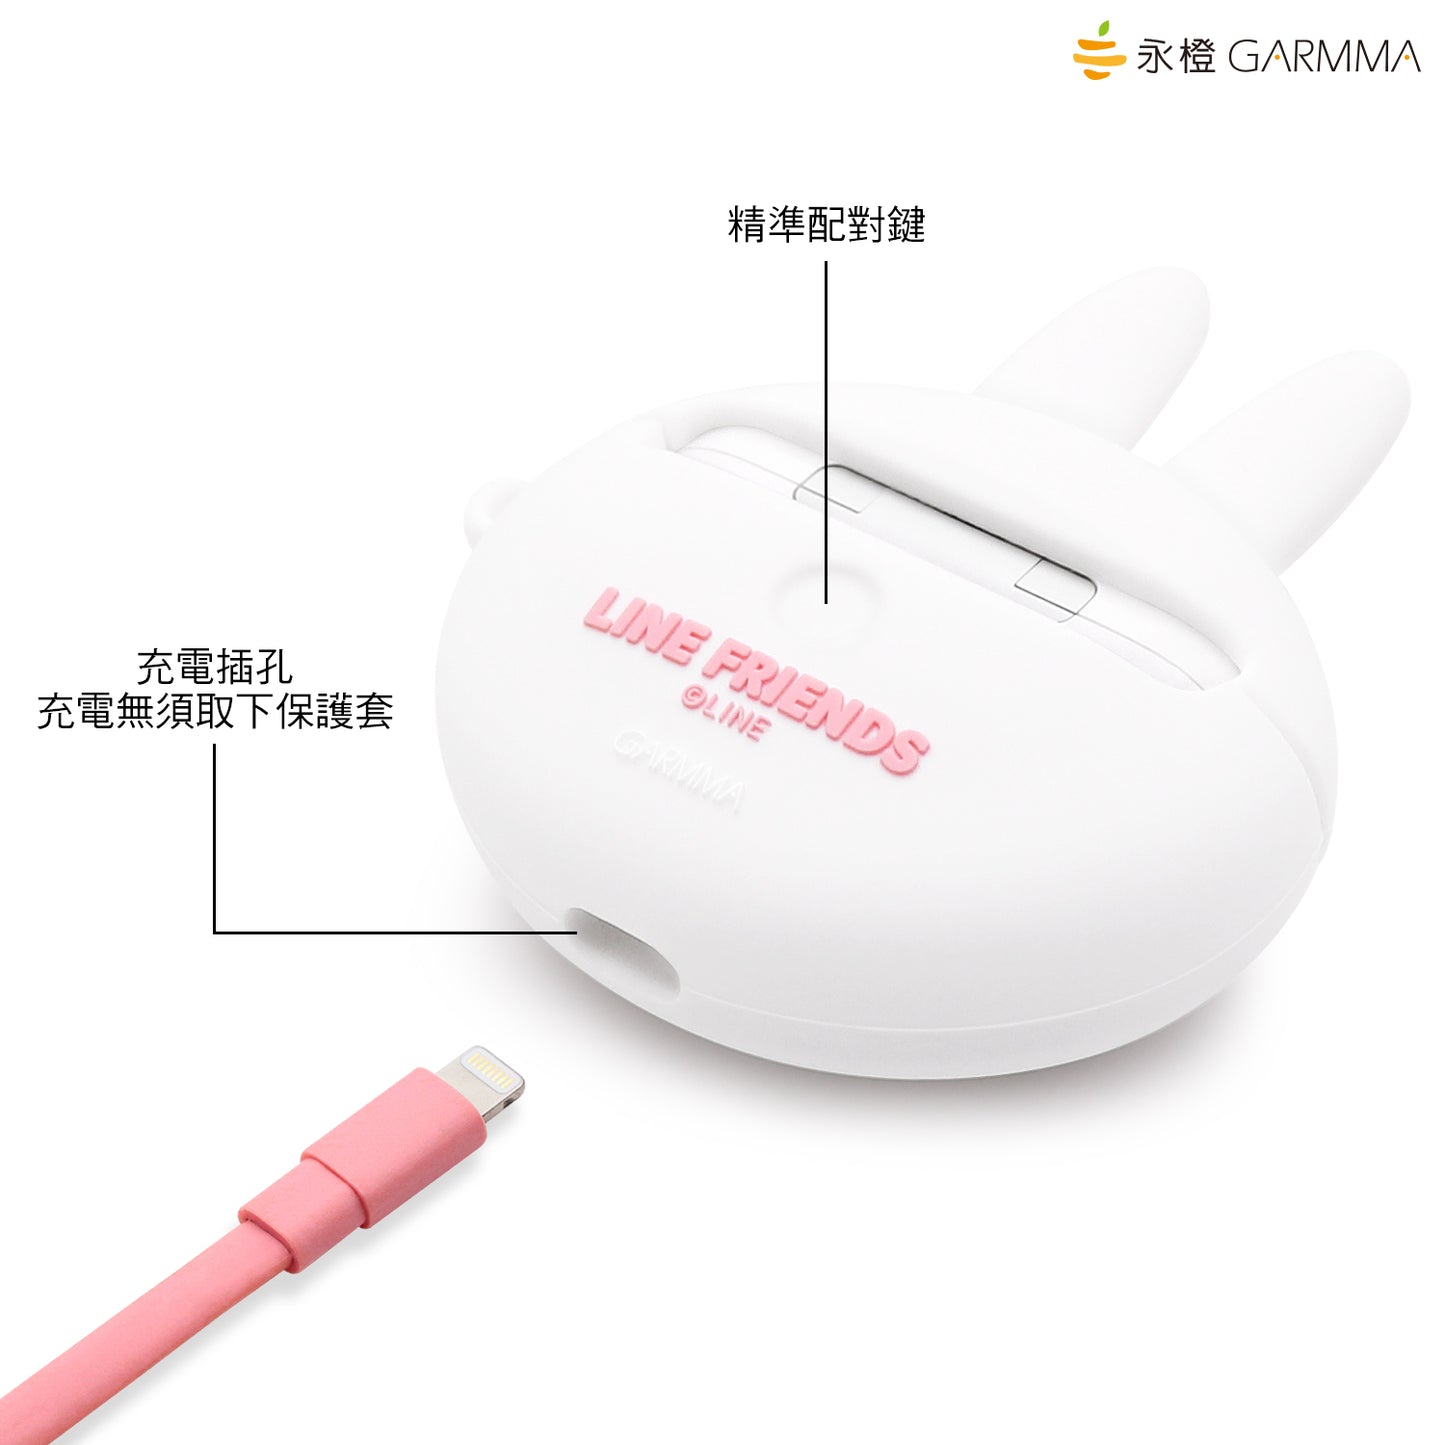 GARMMA Line Friends Shockproof Apple AirPods Pro 2/1 Charging Case Cover with Carabiner Clip